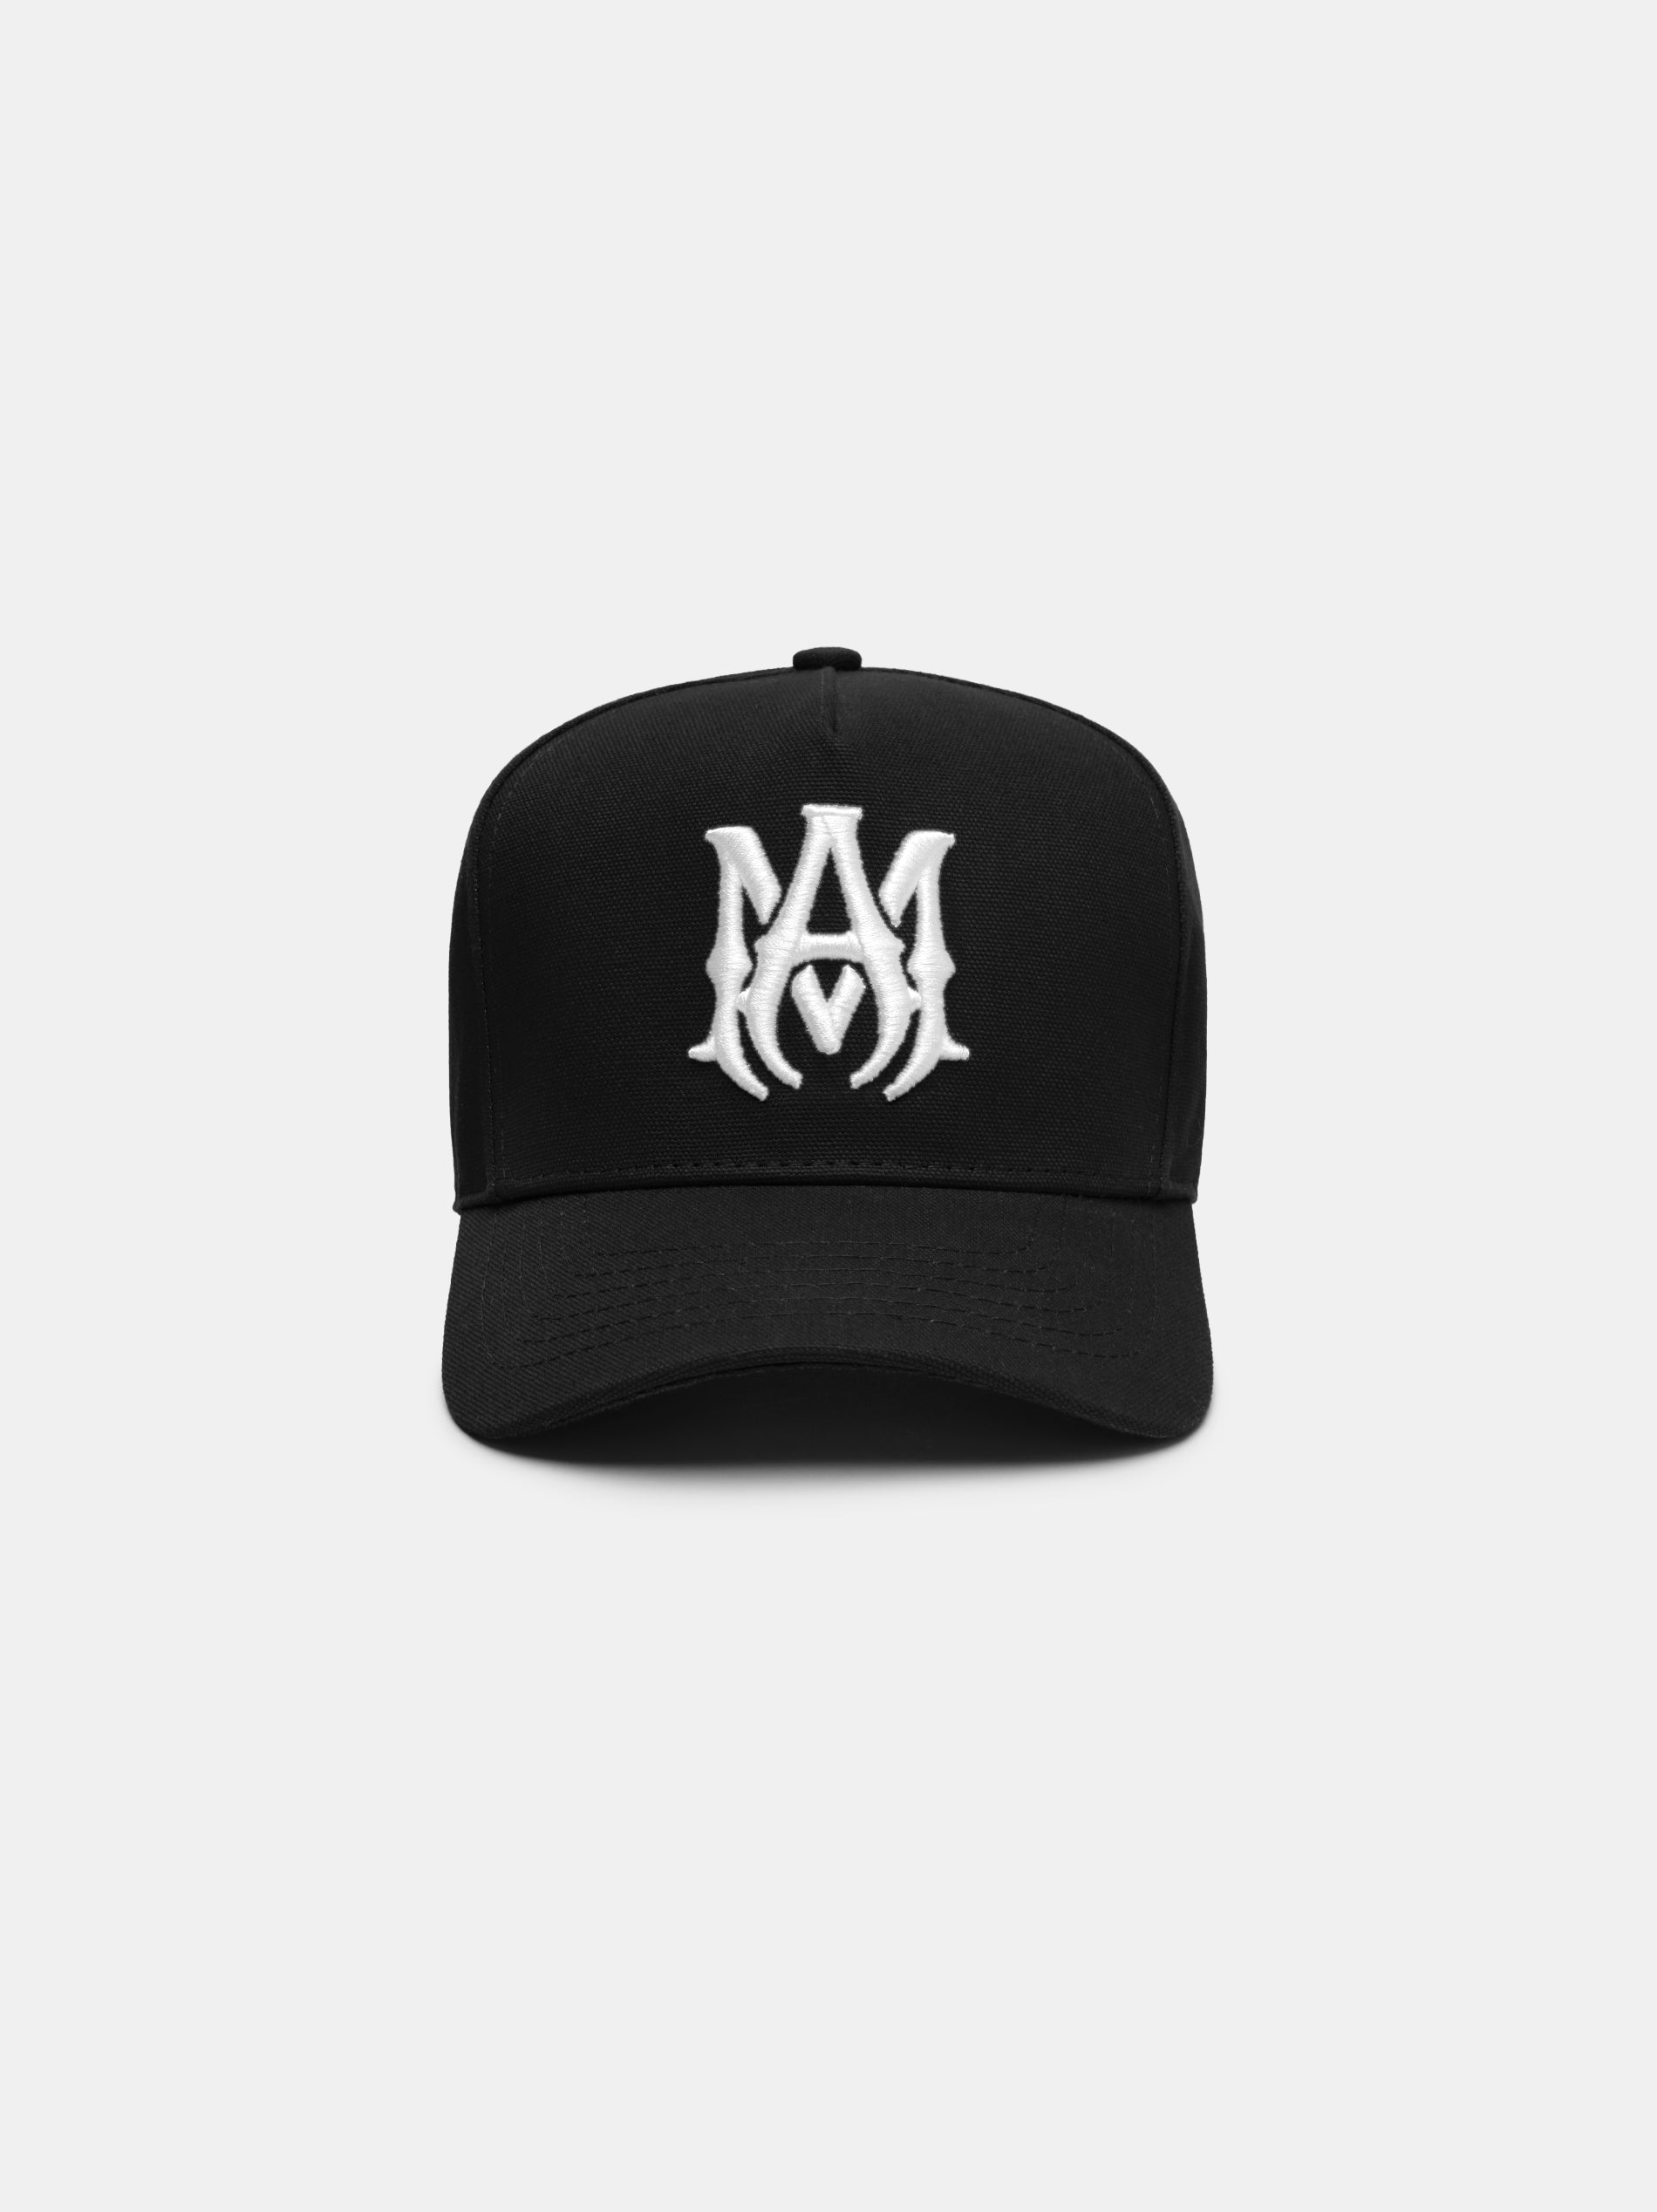 Product FULL CANVAS MA HAT - Black featured image